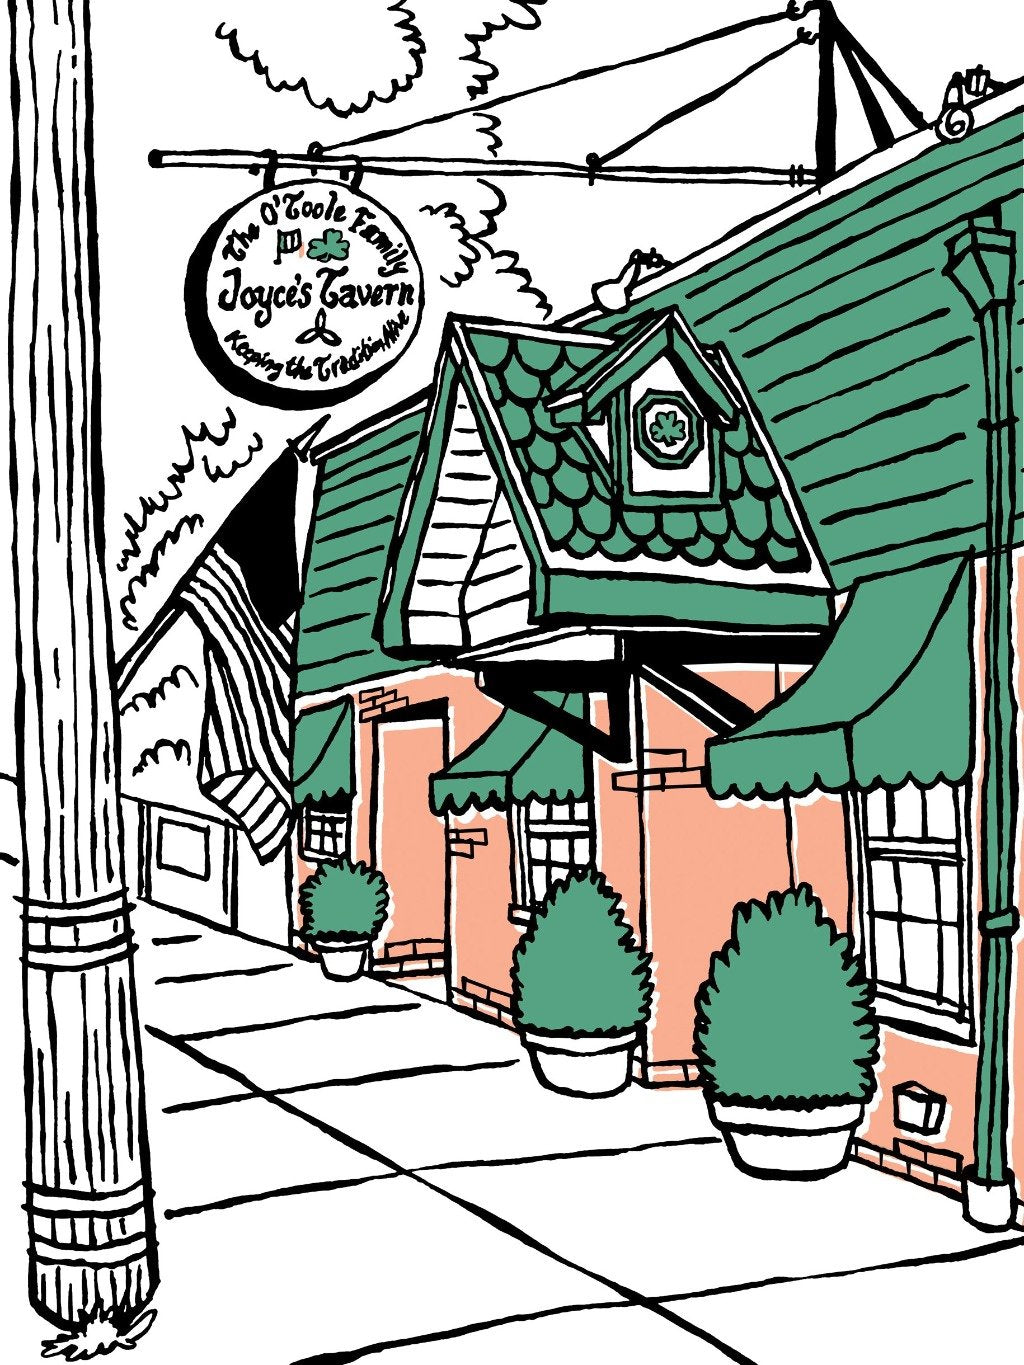 Joyce's Tavern of Staten Island, NY signed prints. (ships free in the US)